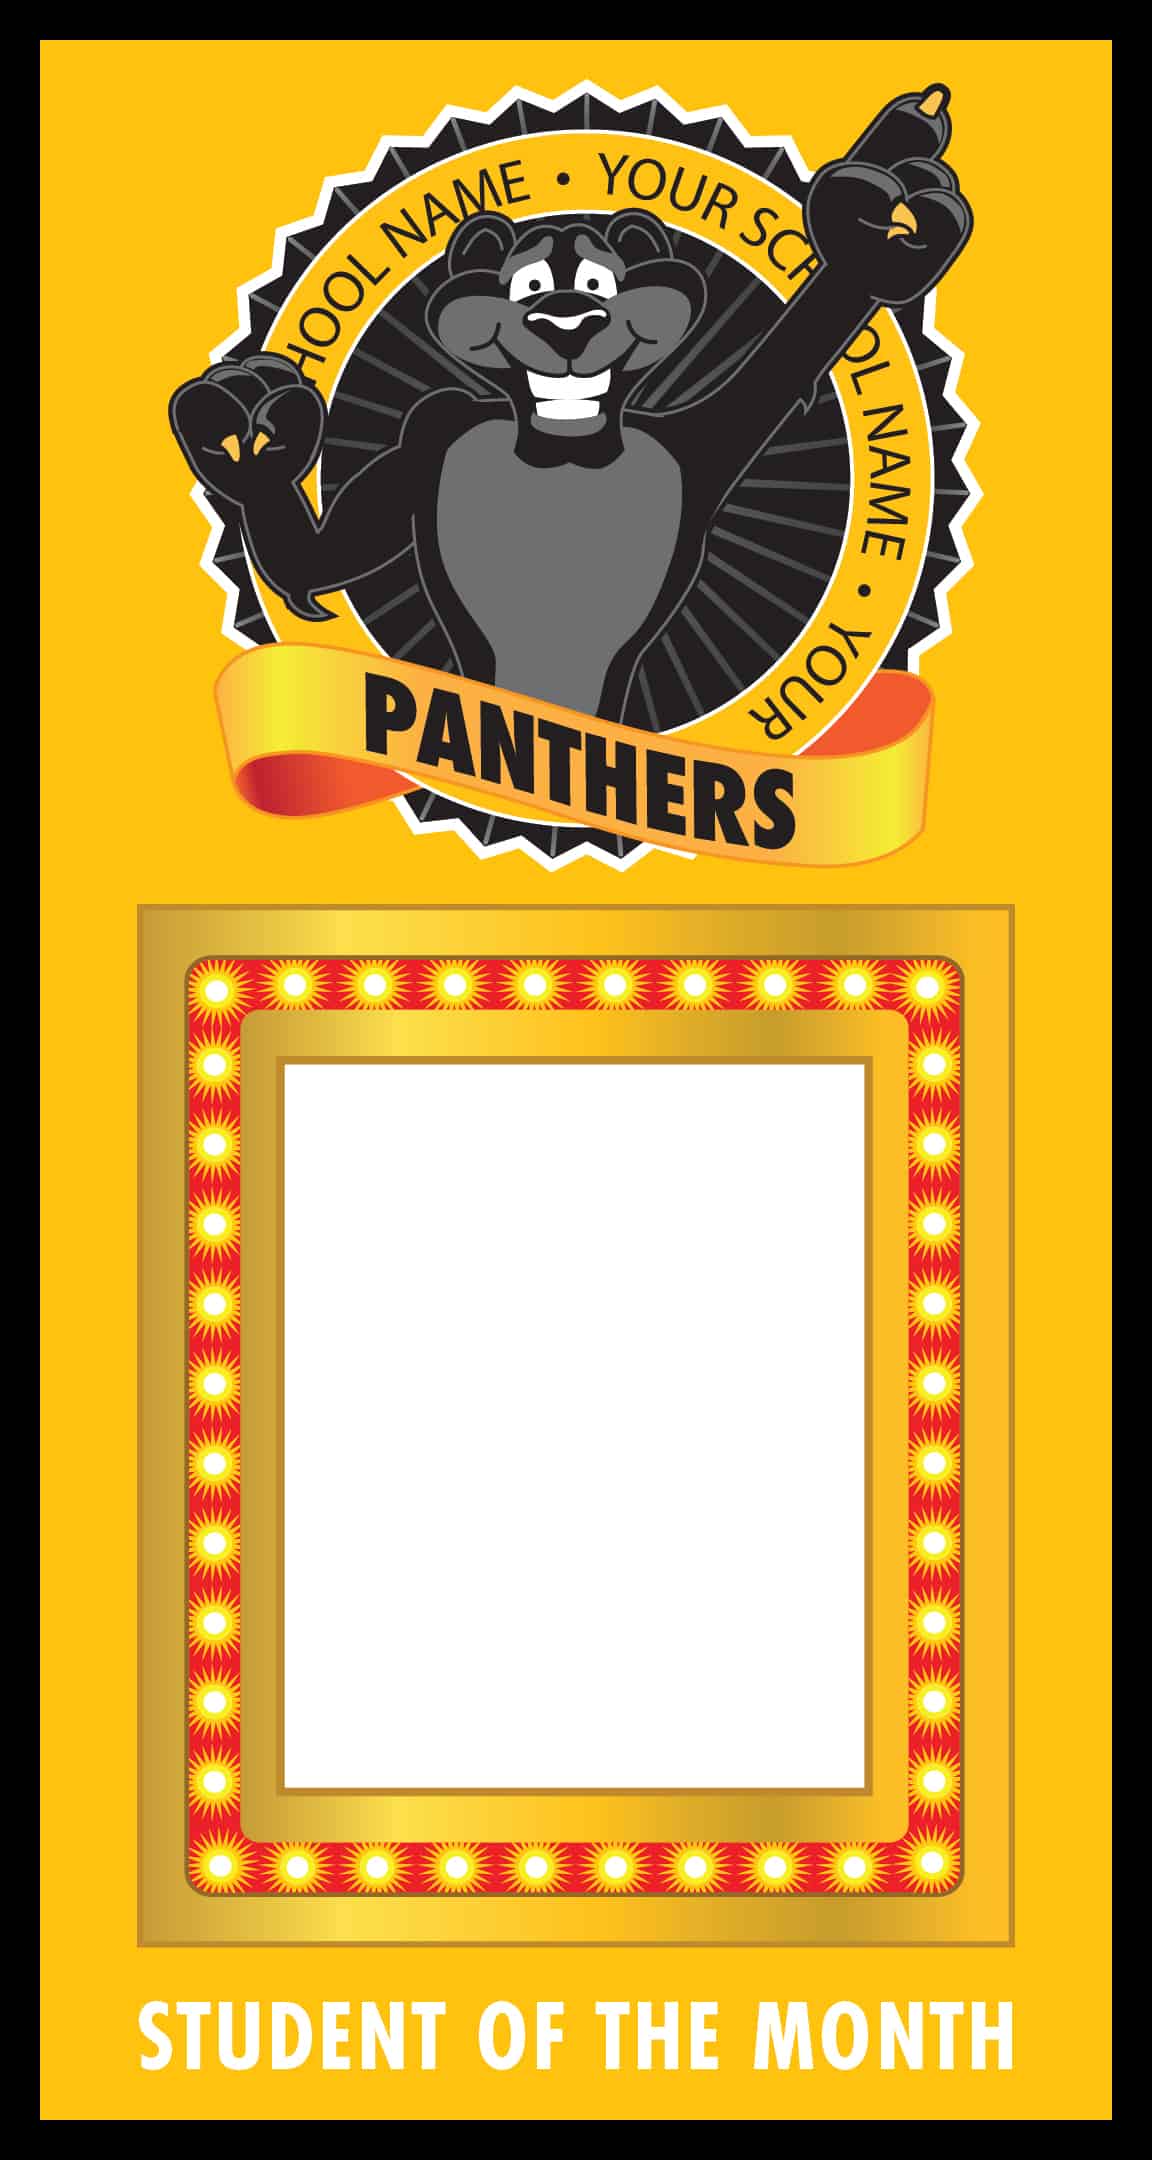 Photo-Marquee-Panther